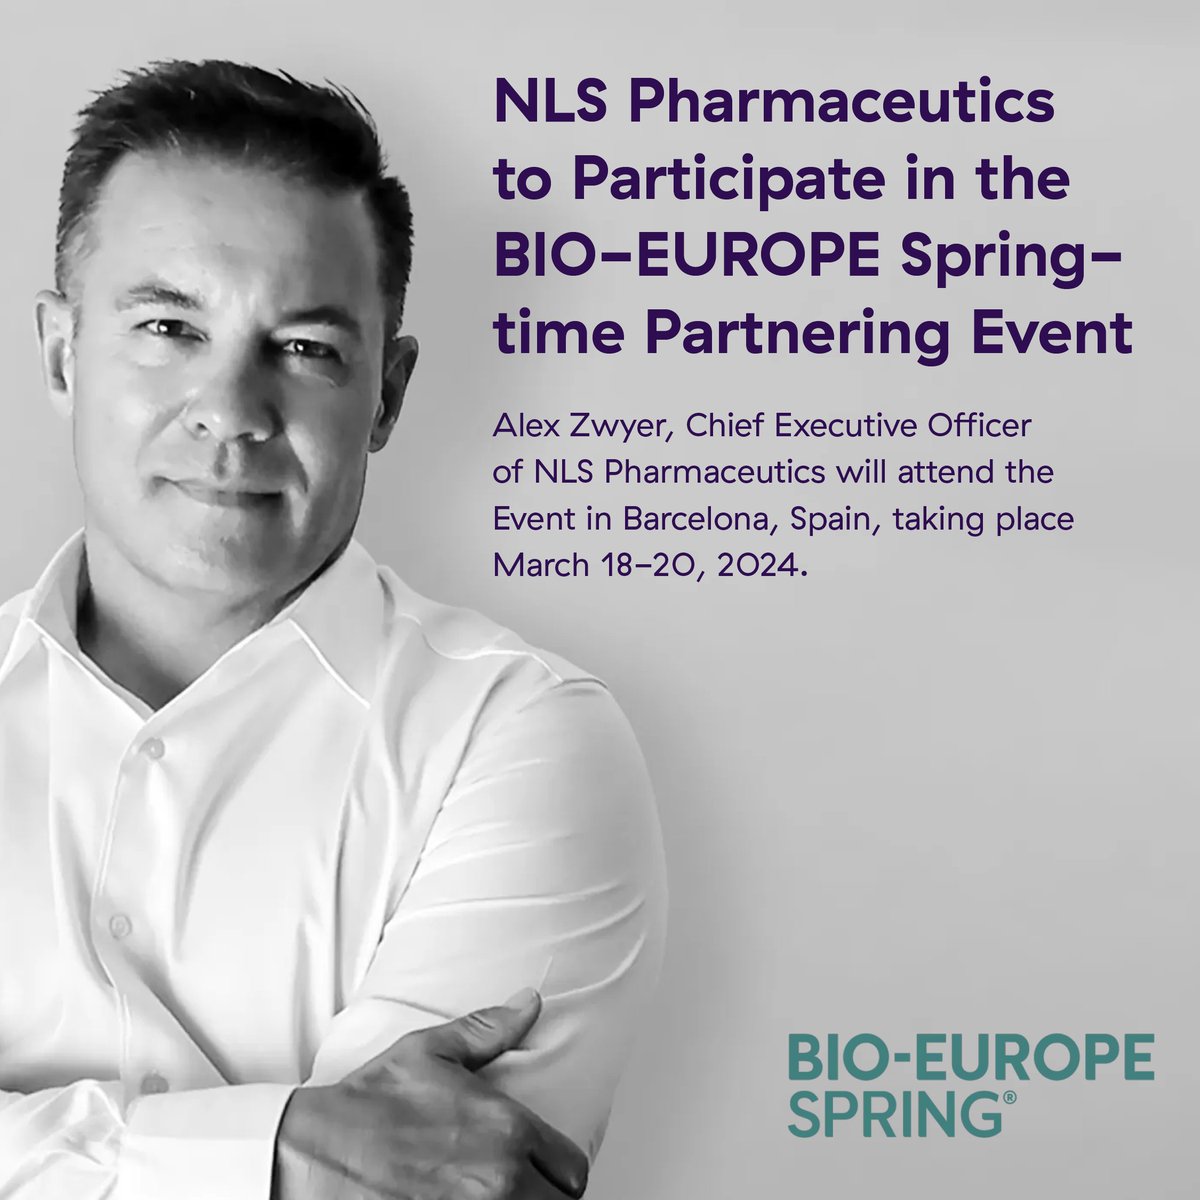 Exciting news! Our CEO, Alex Zwyer, will be at BIO-EUROPE Springtime Partnering Event in Barcelona, Spain, March 18-20. It's a prime networking opportunity. For meetings, reach out to im@nls-pharma.com. Details: rb.gy/wvv9bh #BIOEurope $NLSP